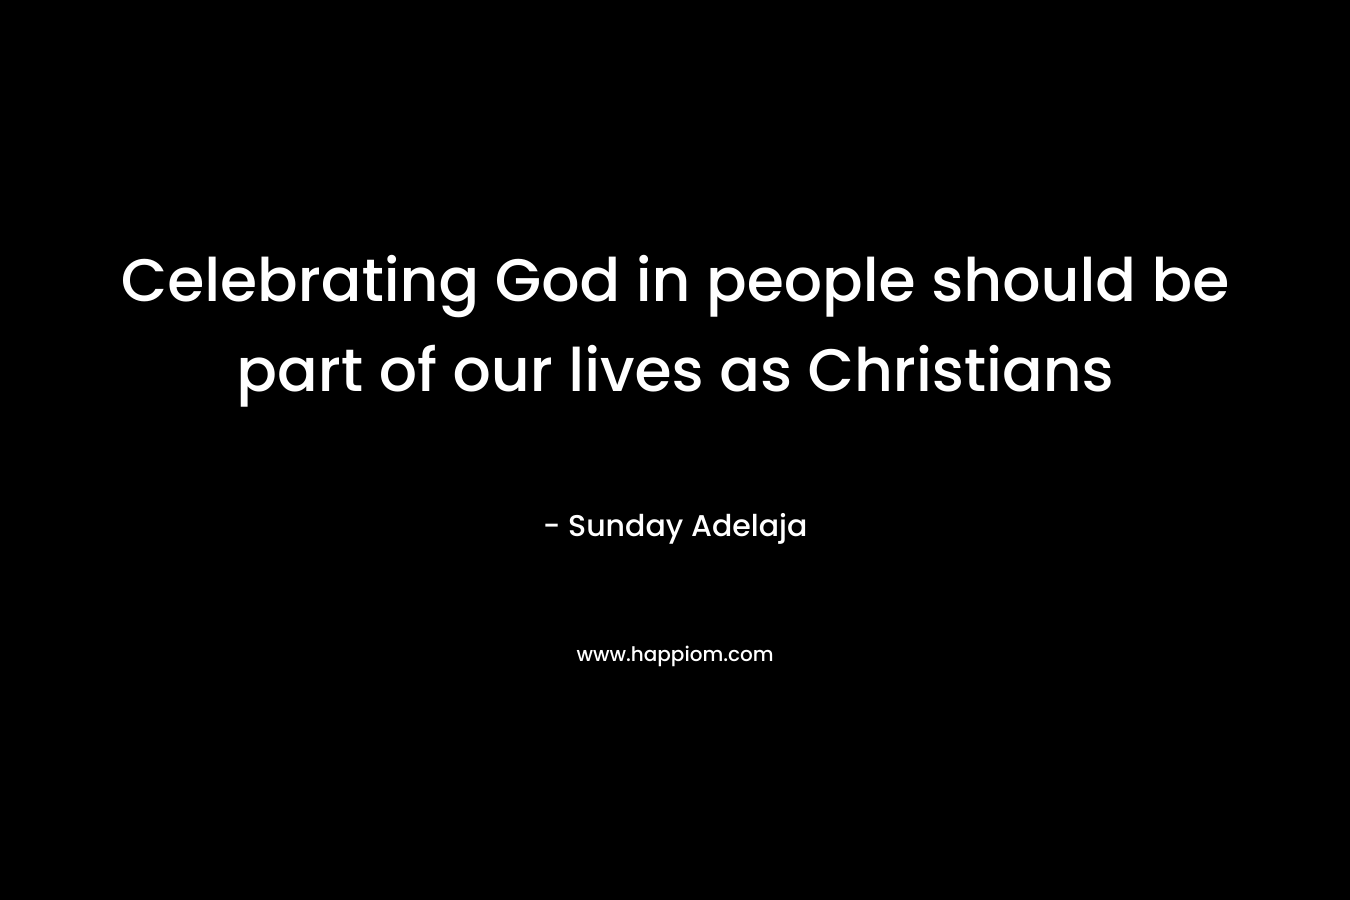 Celebrating God in people should be part of our lives as Christians